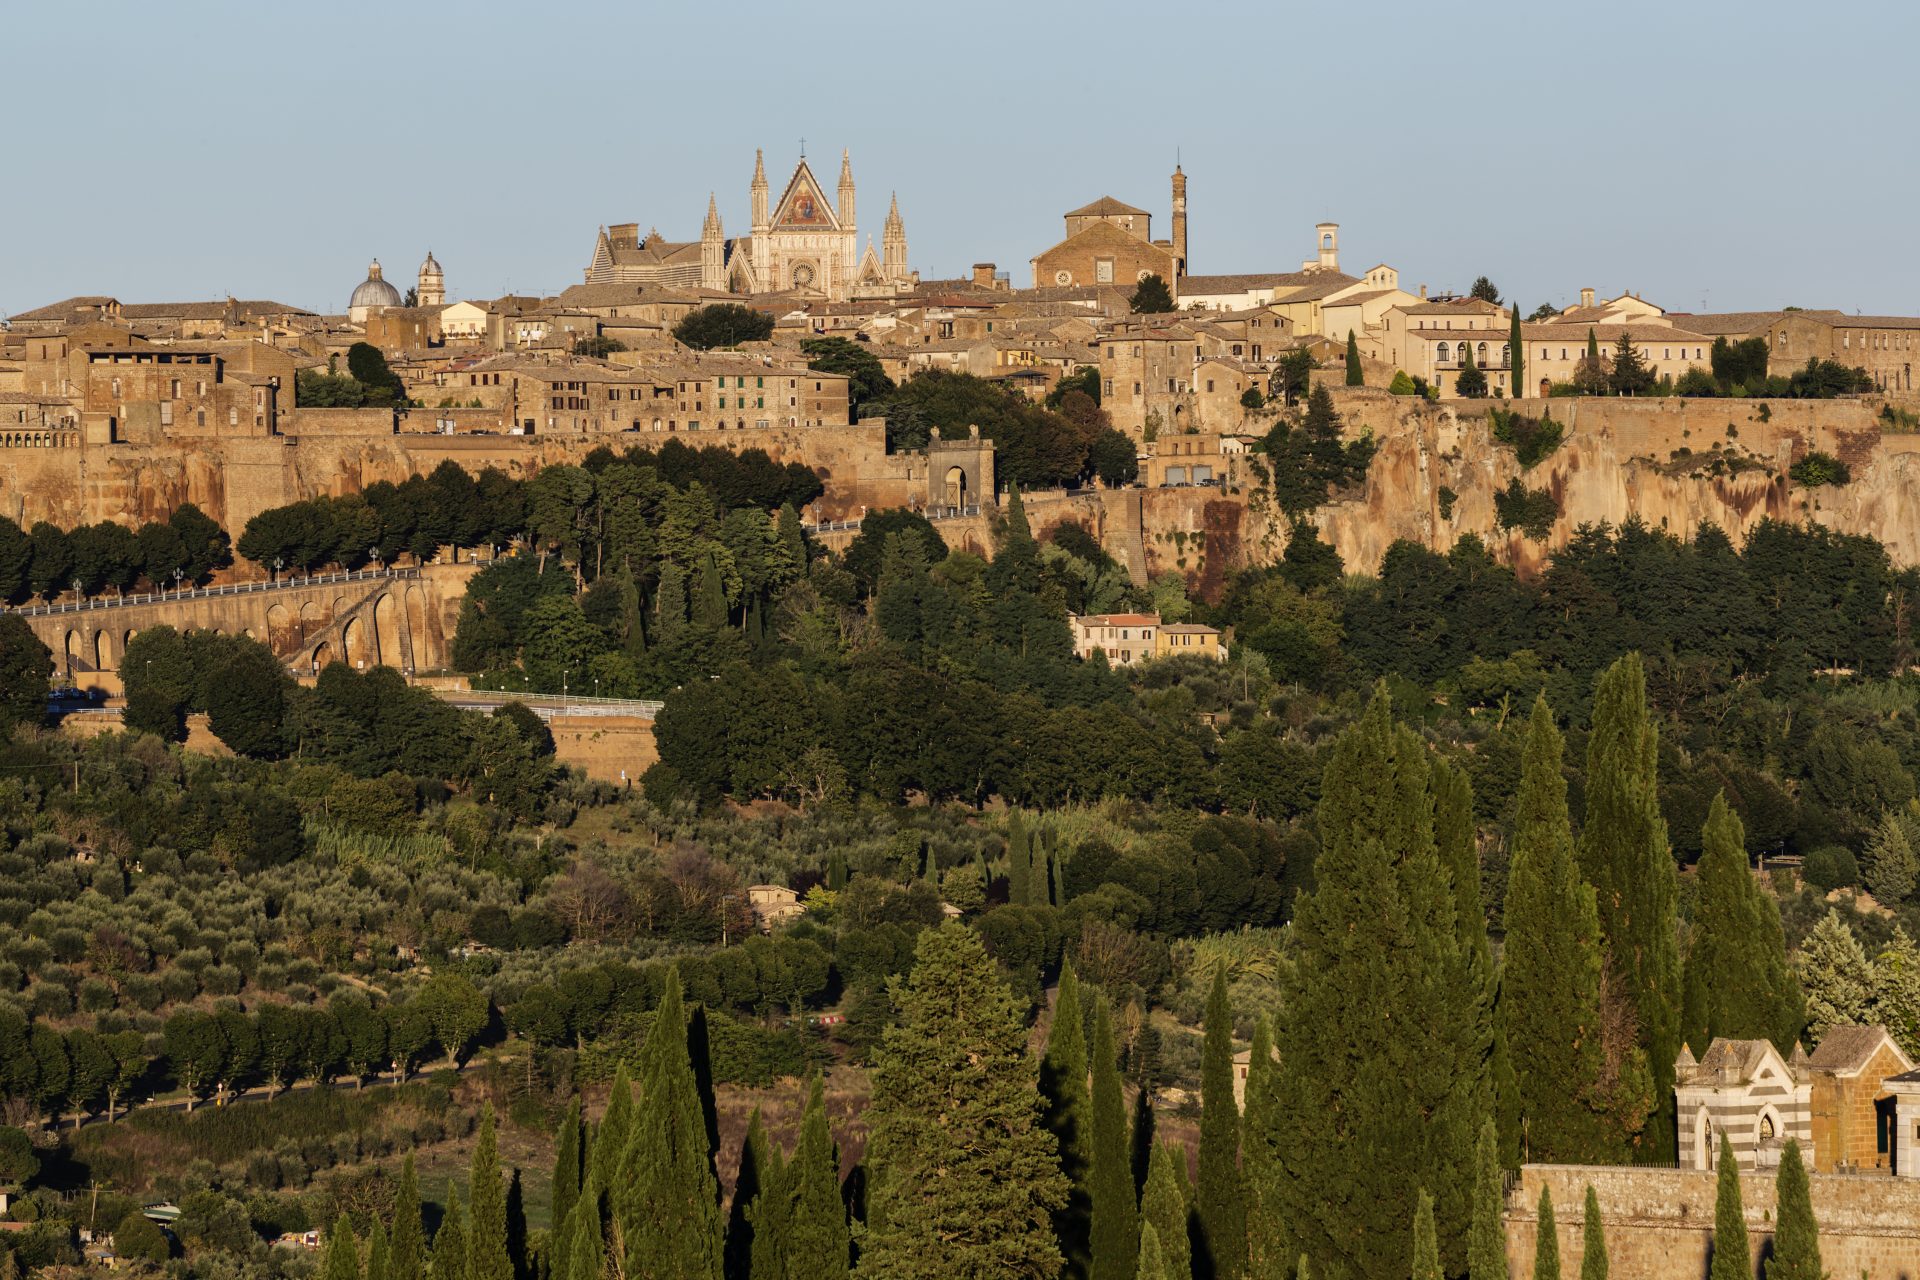 <p>Founded as an Etruscan settlement and an important center for bronze working in Roman times, this town should be on anyone's bucket list. It has a spectacular 13th-century cathedral, called 'the golden lily of the cathedrals.' The view from the Torre del Moro is not to be missed either.</p>